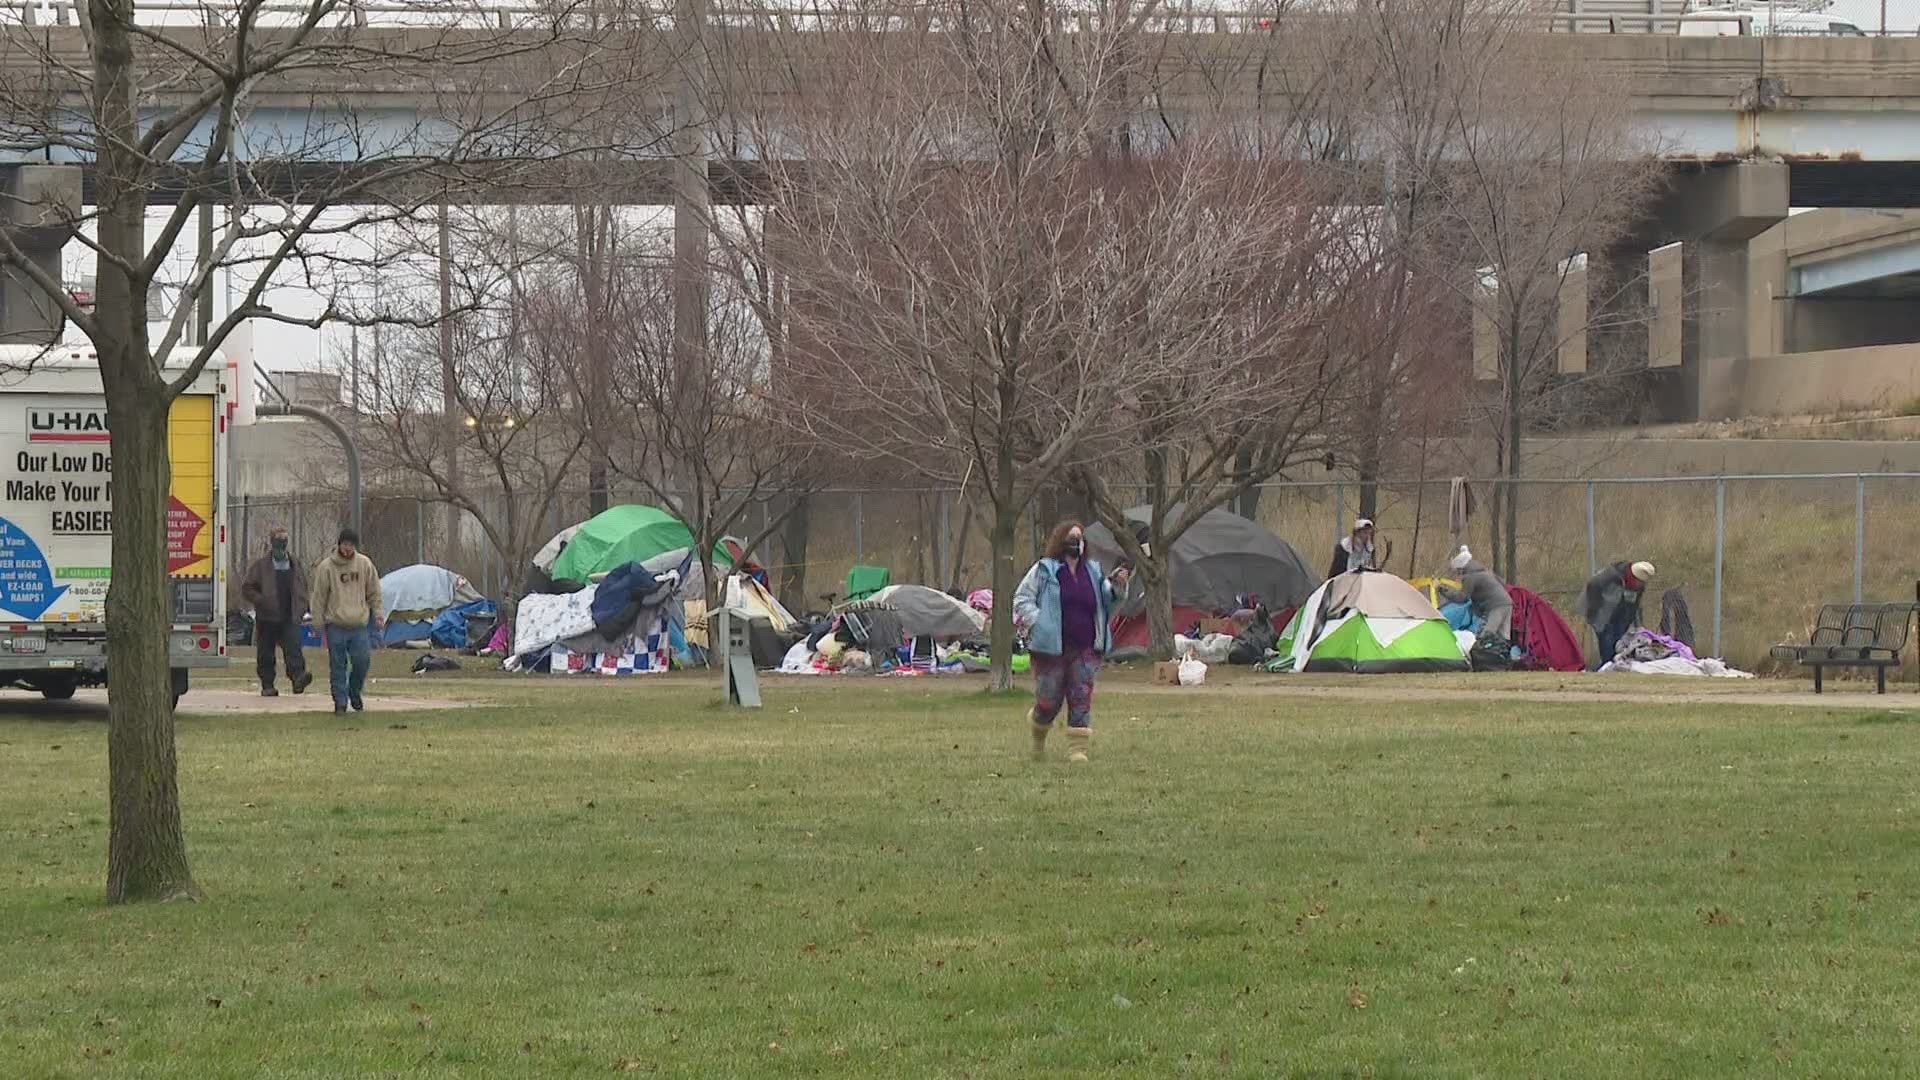 The people staying at a growing tent city in downtown Grand Rapids will have to find somewhere else to go. City leaders ordered them to leave tonight.